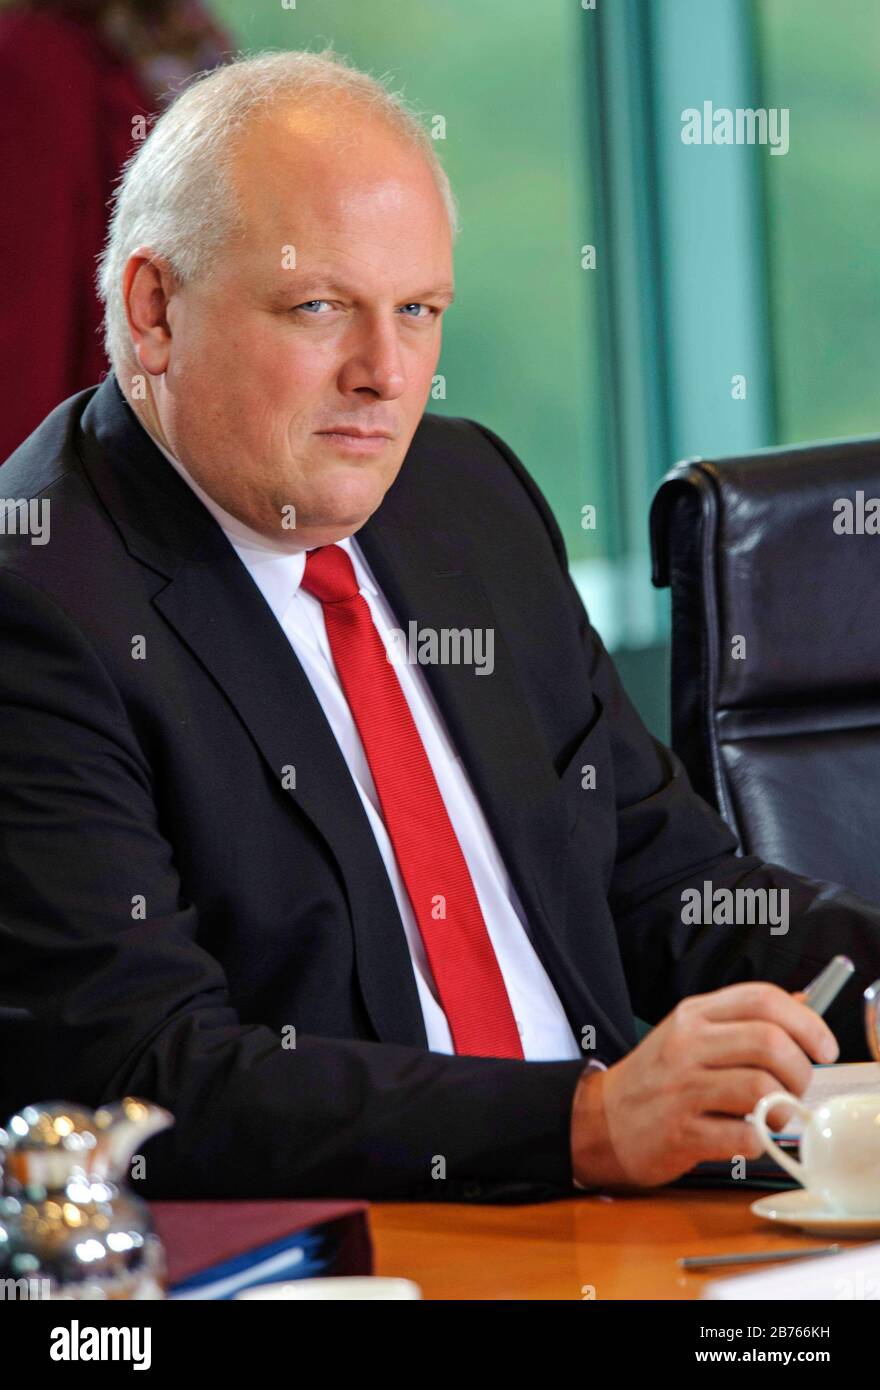 Germany, Berlin, 21.10.2015. Cabinet meeting on 21.10.2015 in the Federal Chancellery in Berlin. Ulrich Kelber (SPD), Parliamentary State Secretary to the Federal Minister of Justice. [automated translation] Stock Photo